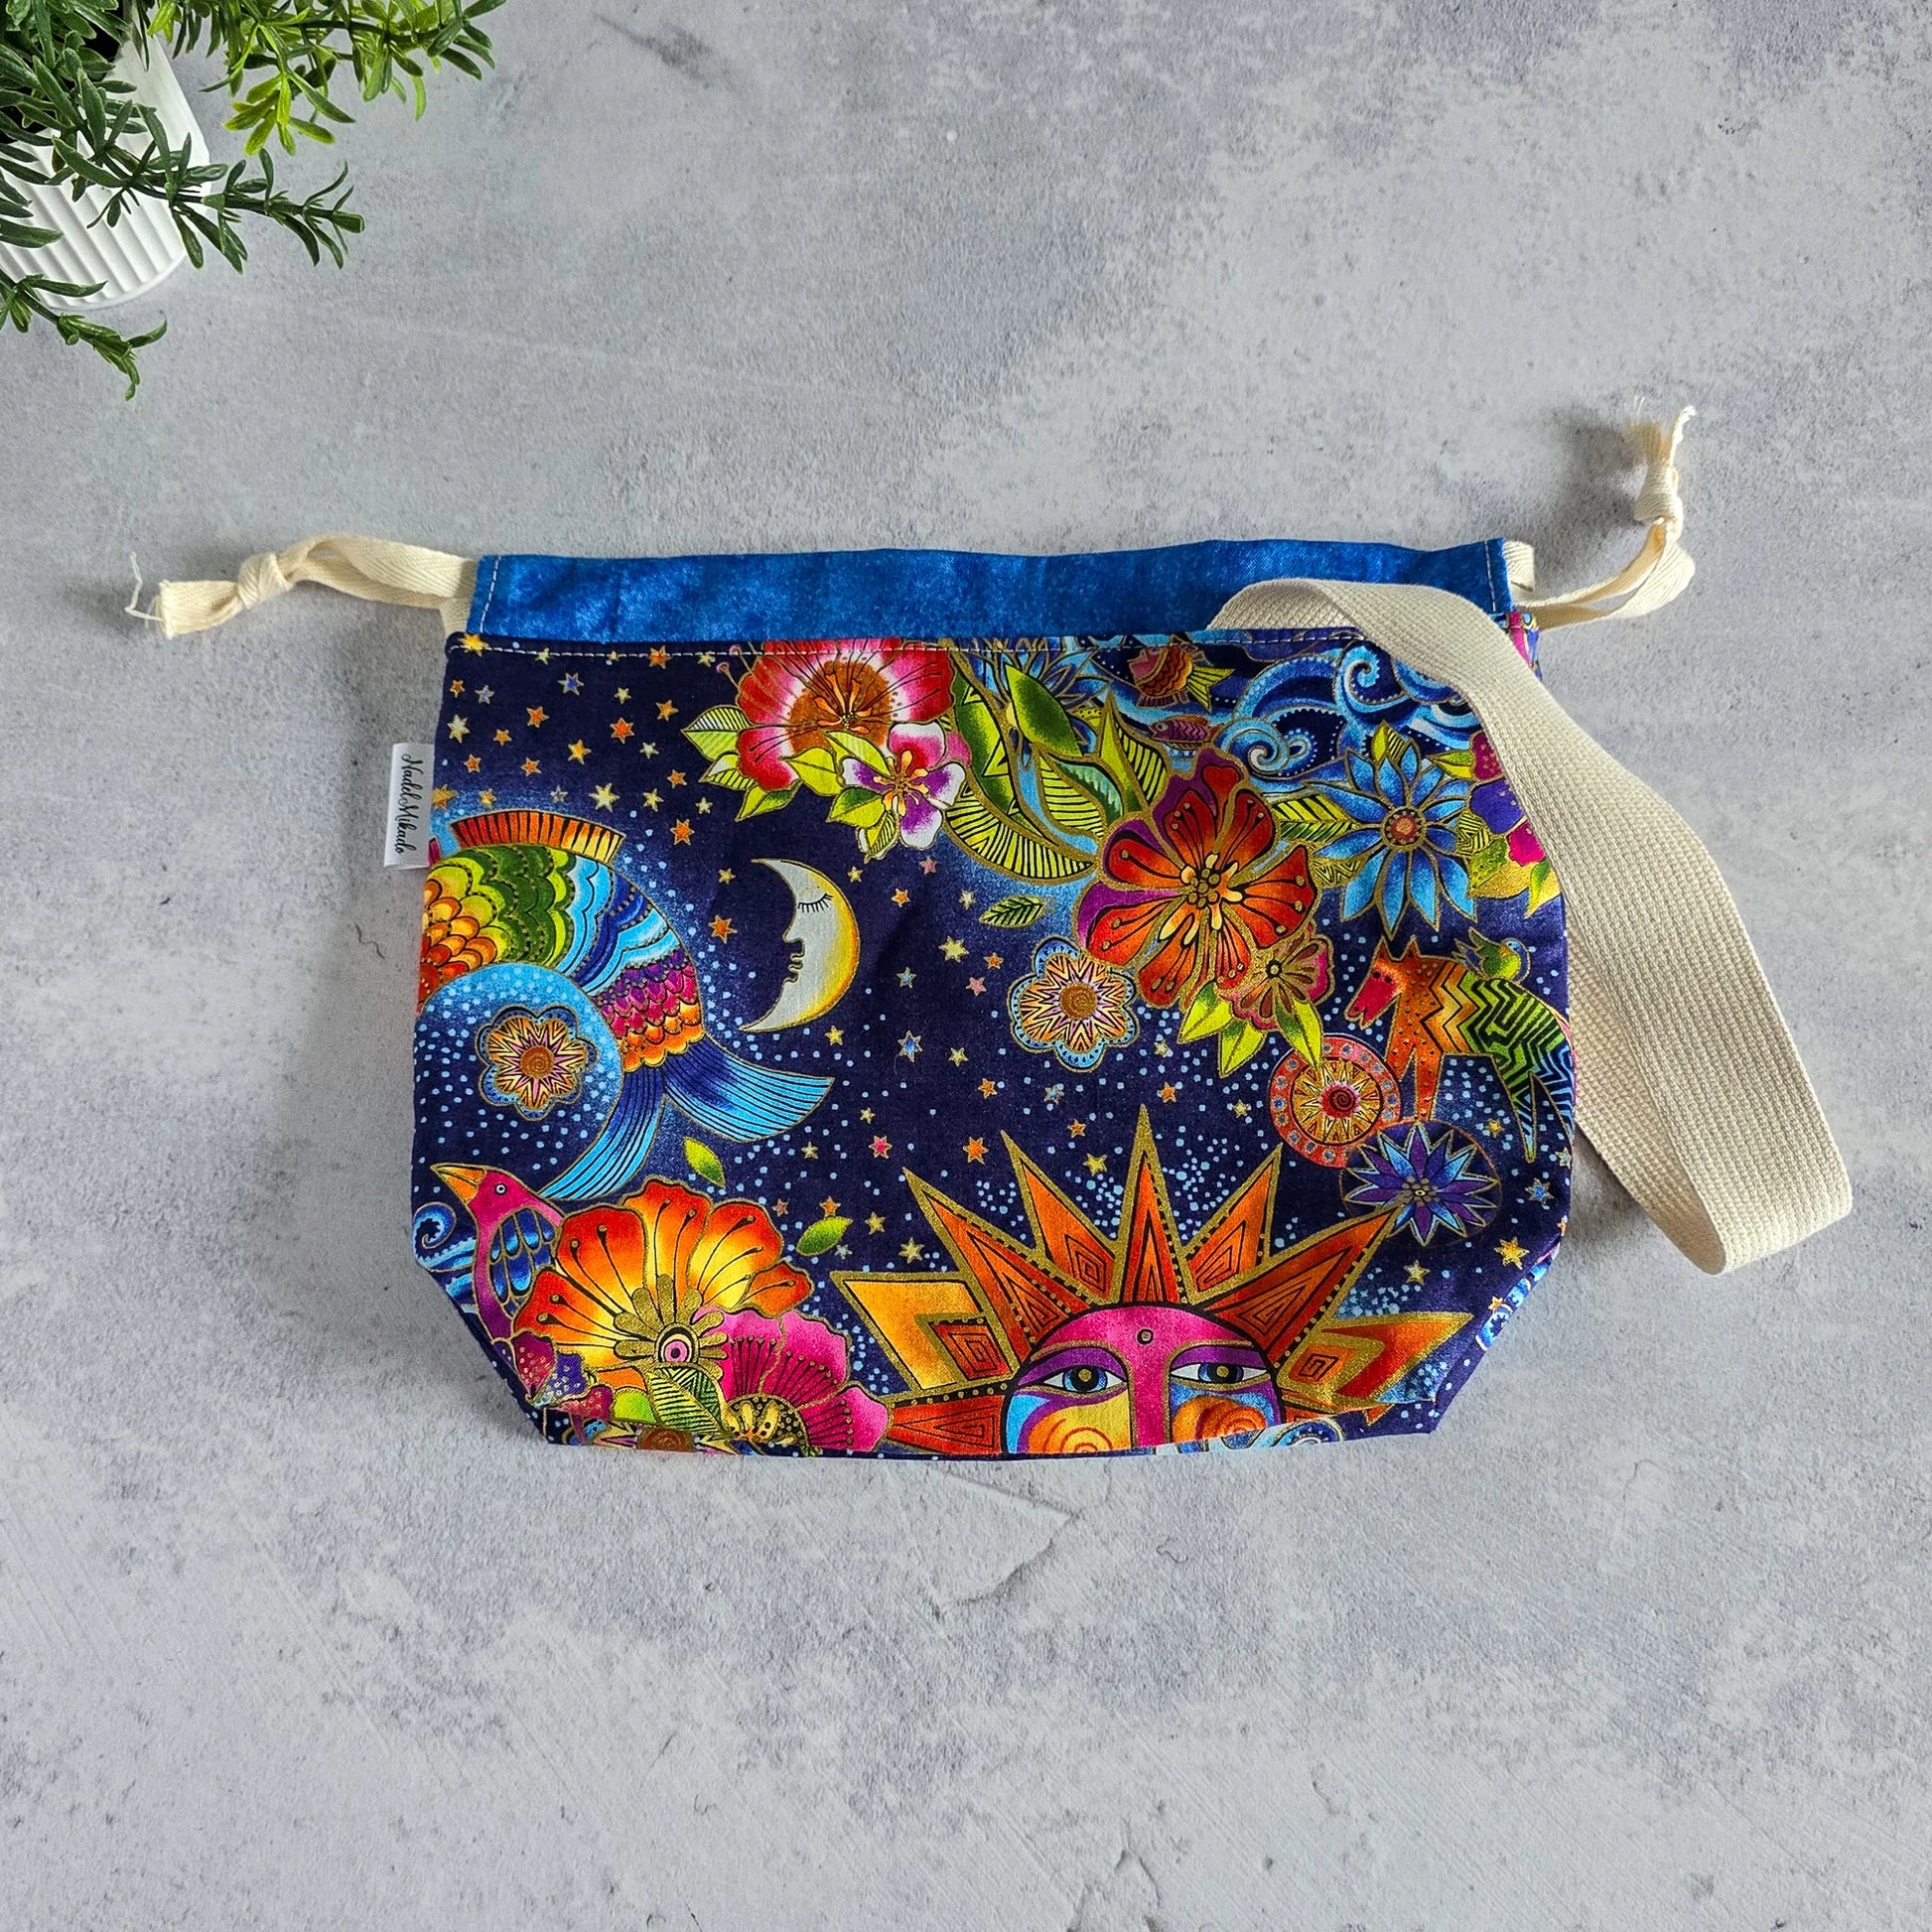 {{ Projekttasche Project bag for knitters Stricktasche Handarbeitstasche Strickprojekttasche knitting project bag}}